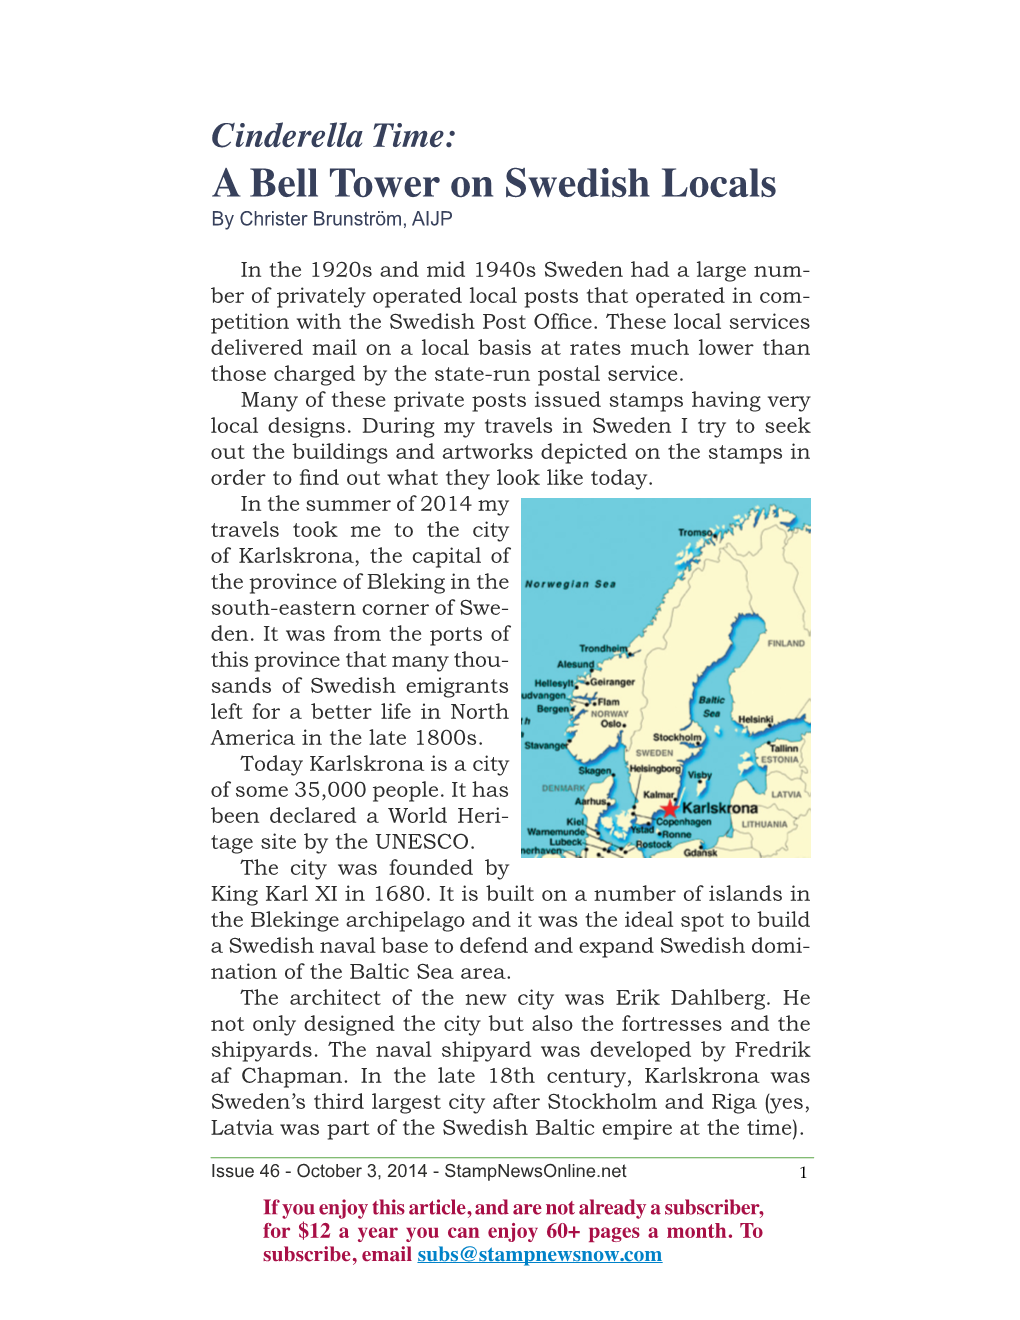 A Bell Tower on Swedish Locals by Christer Brunström, AIJP